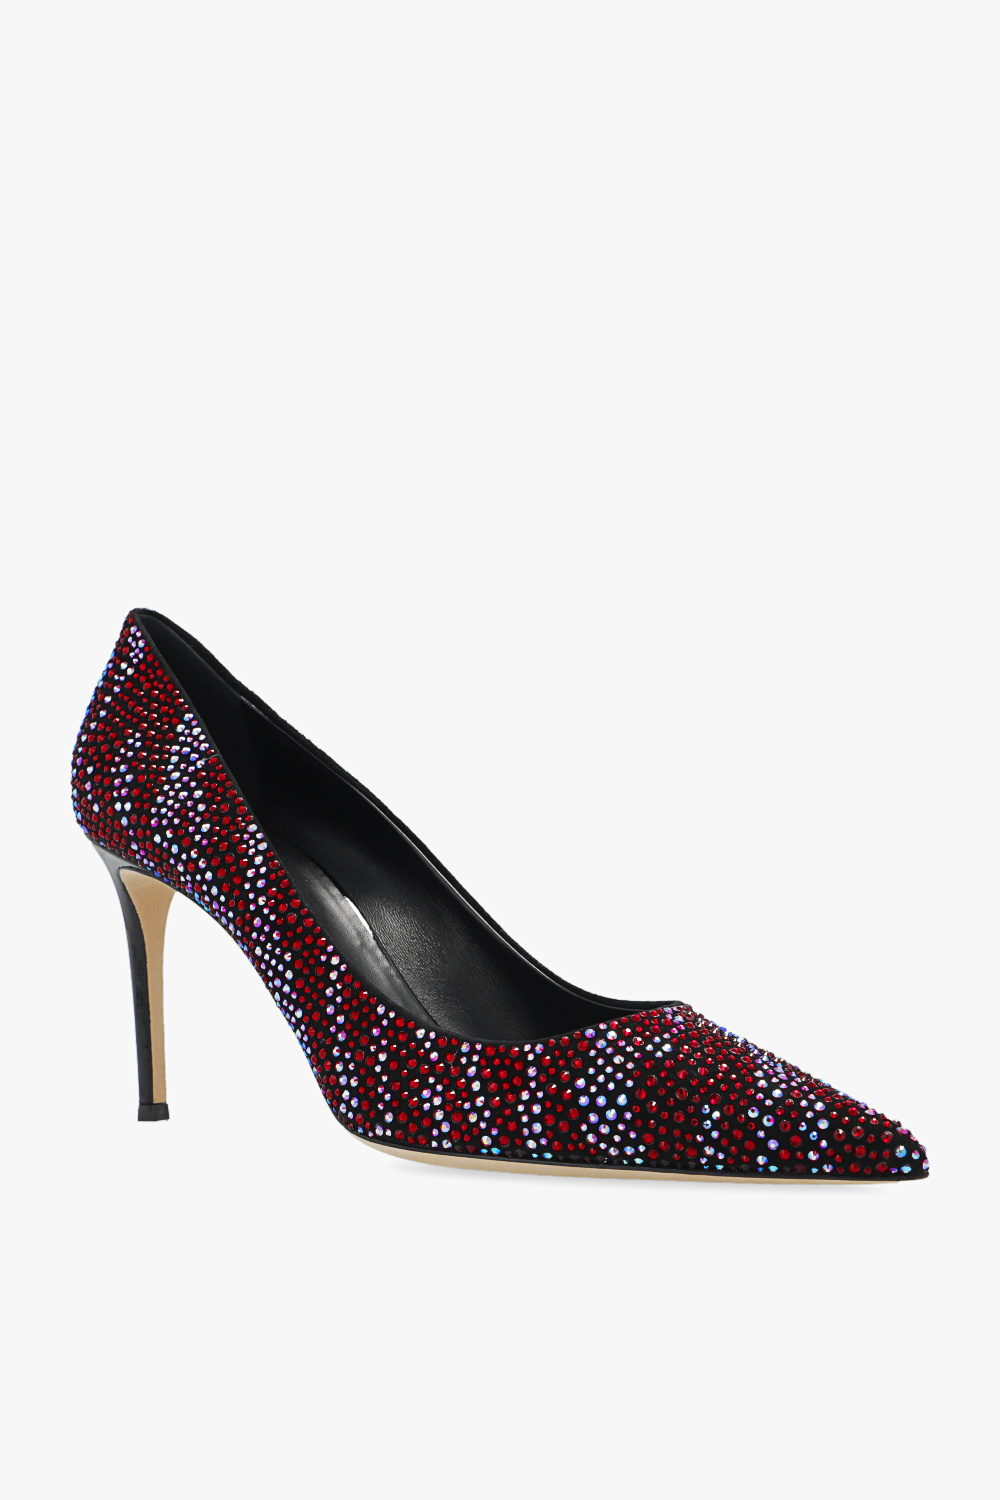 Giuseppe Zanotti Pumps with crystals